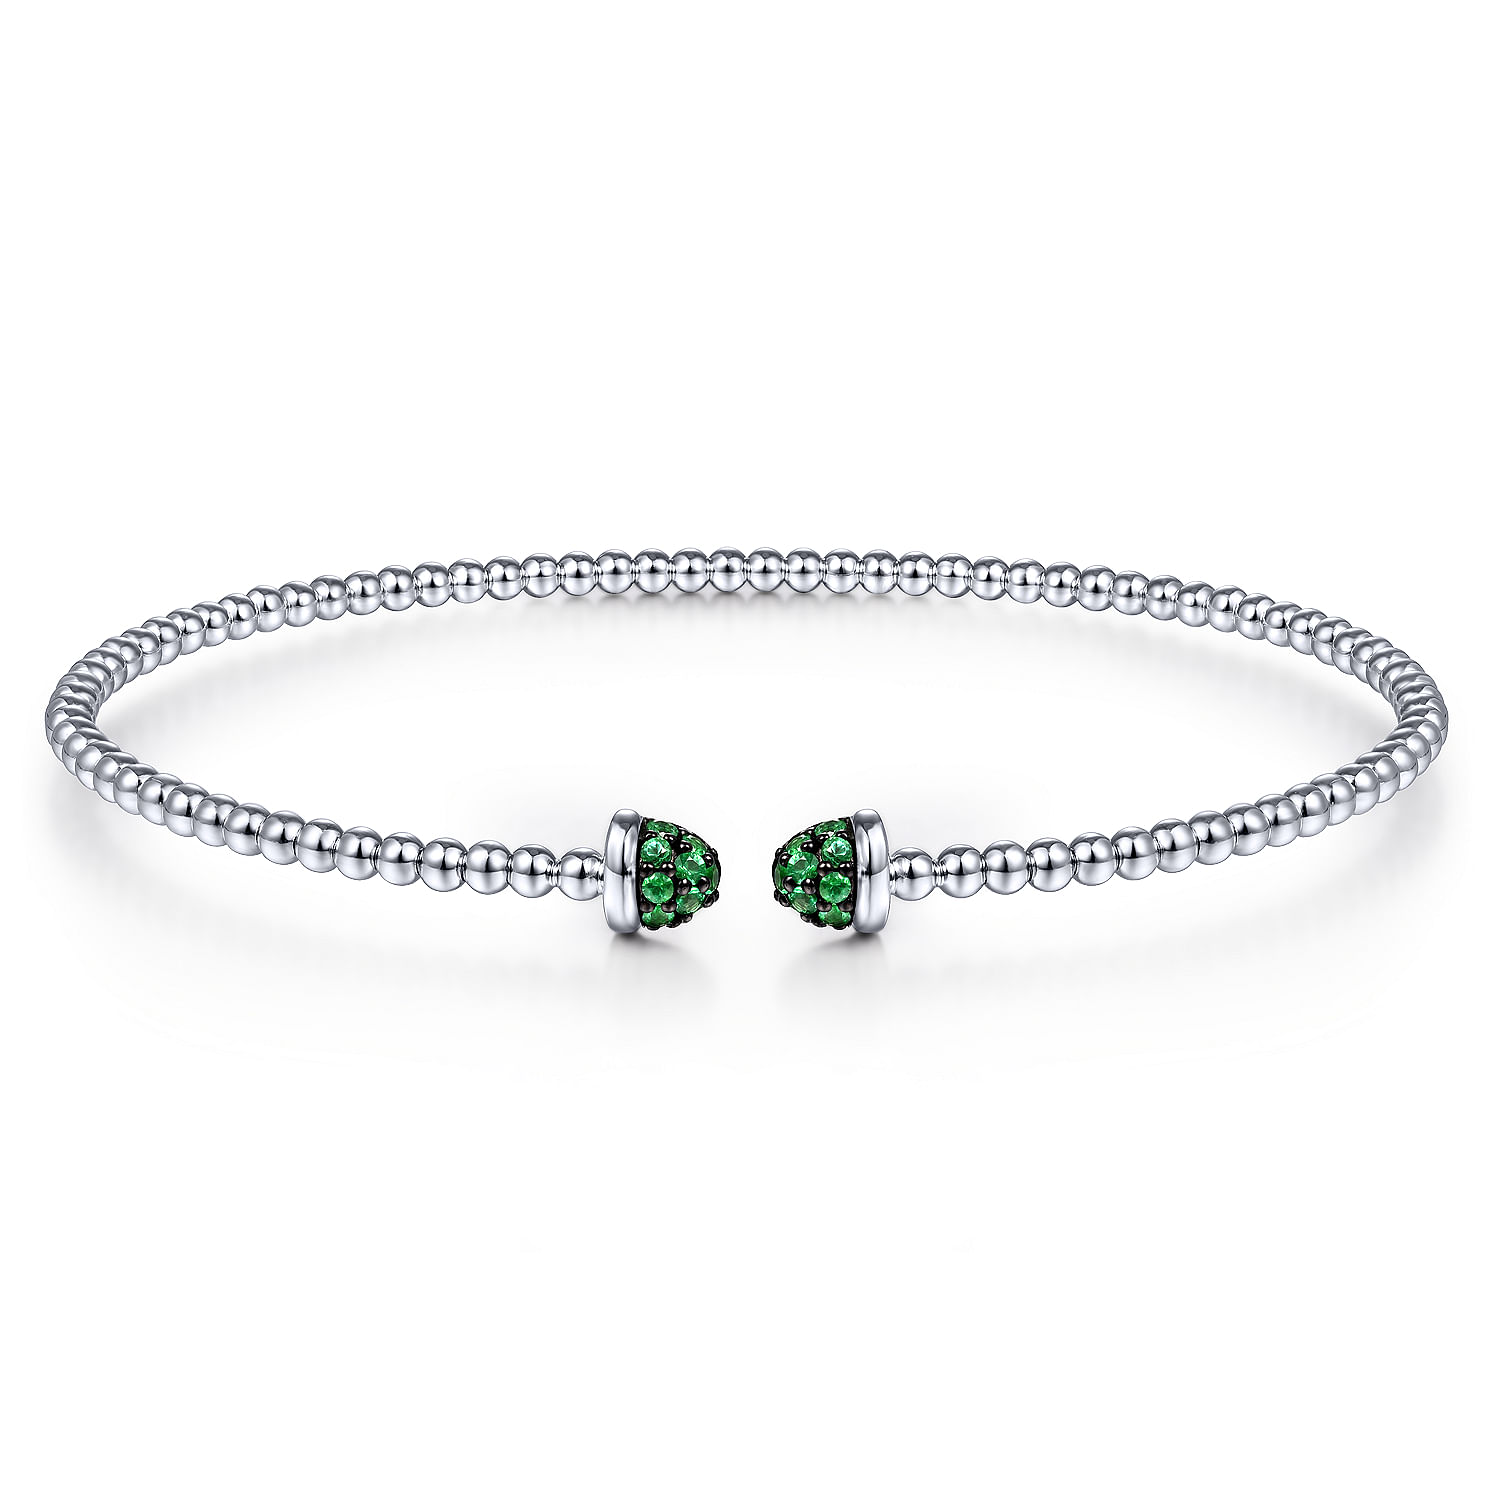 14K White Gold Bujukan Bead Cuff Bracelet with Emerald Pave Caps